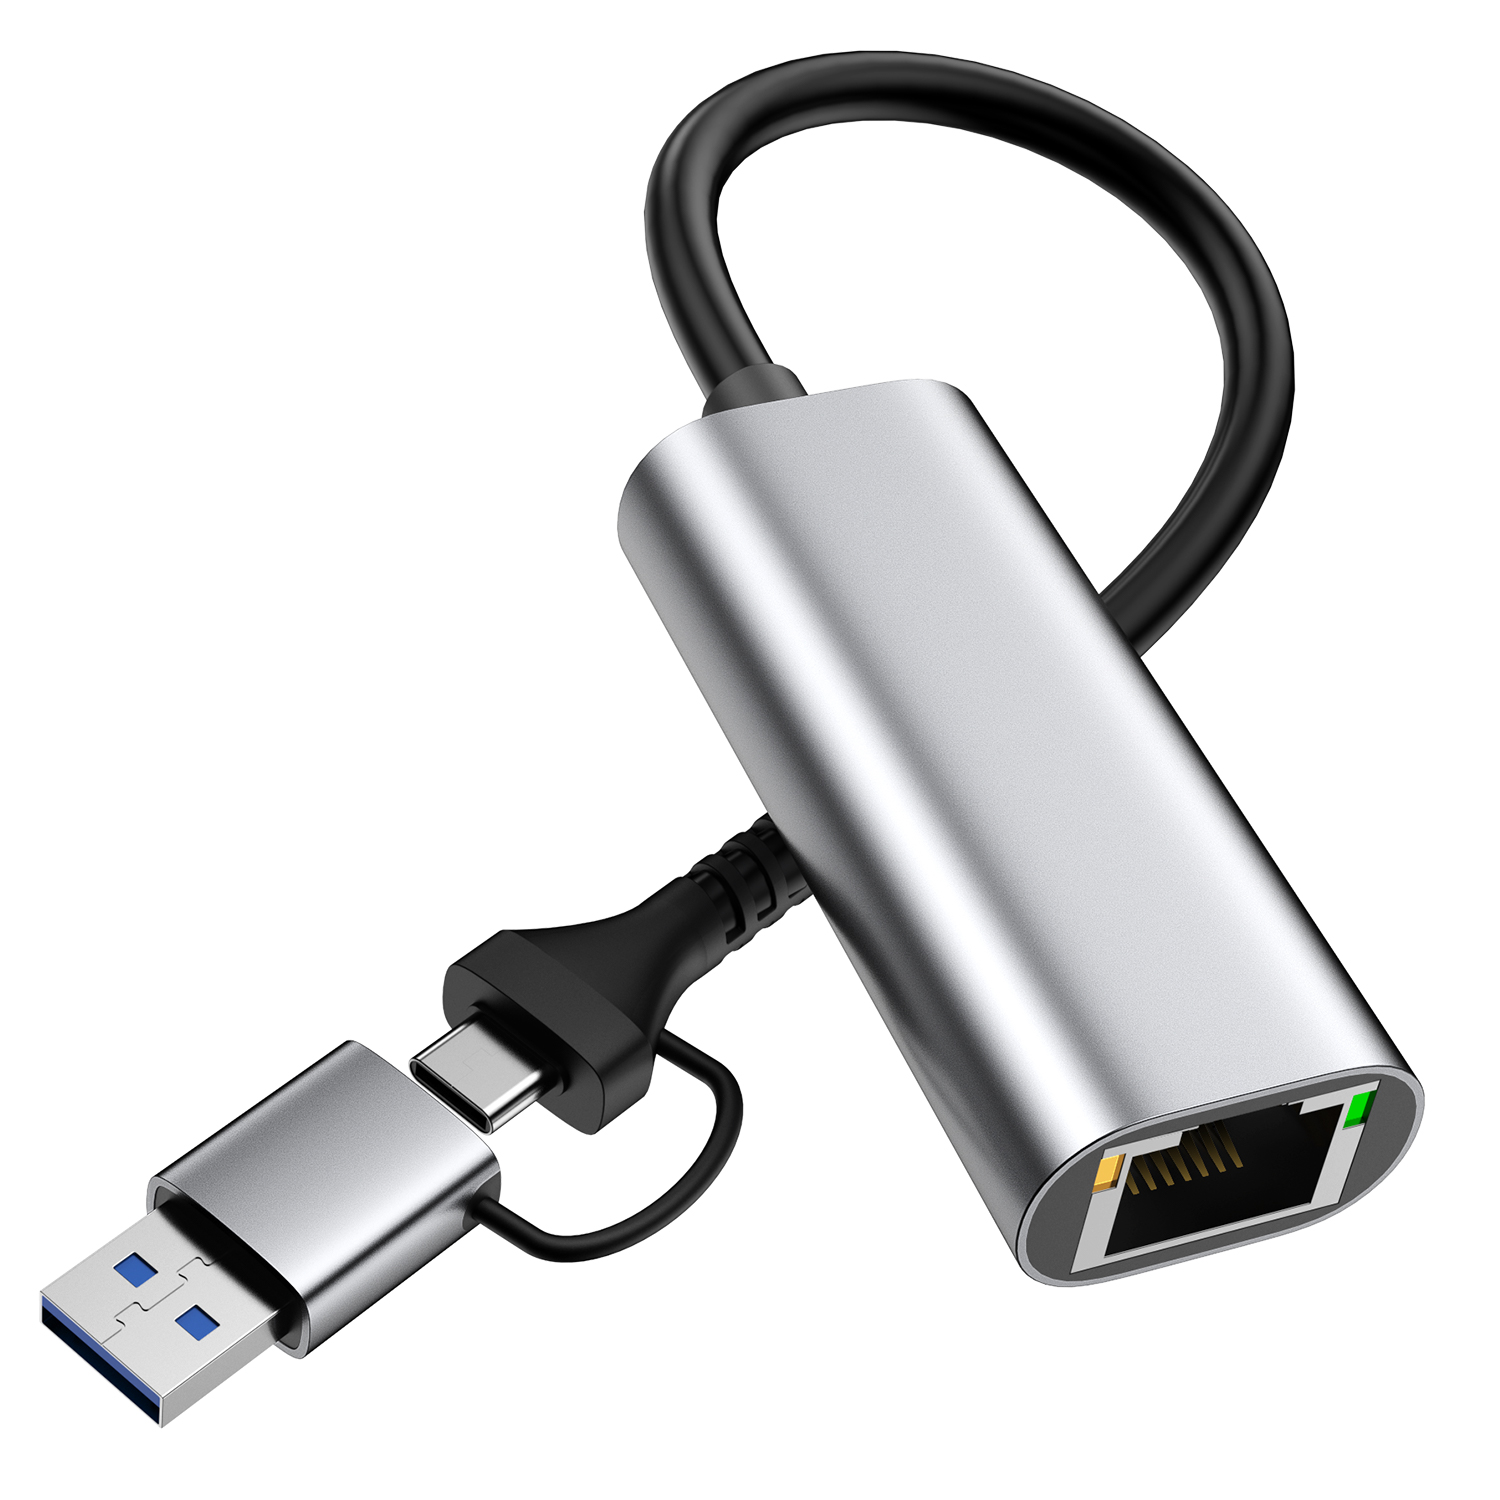 2in1 USB 3.0 TO Gigabit Ethernet Adapter